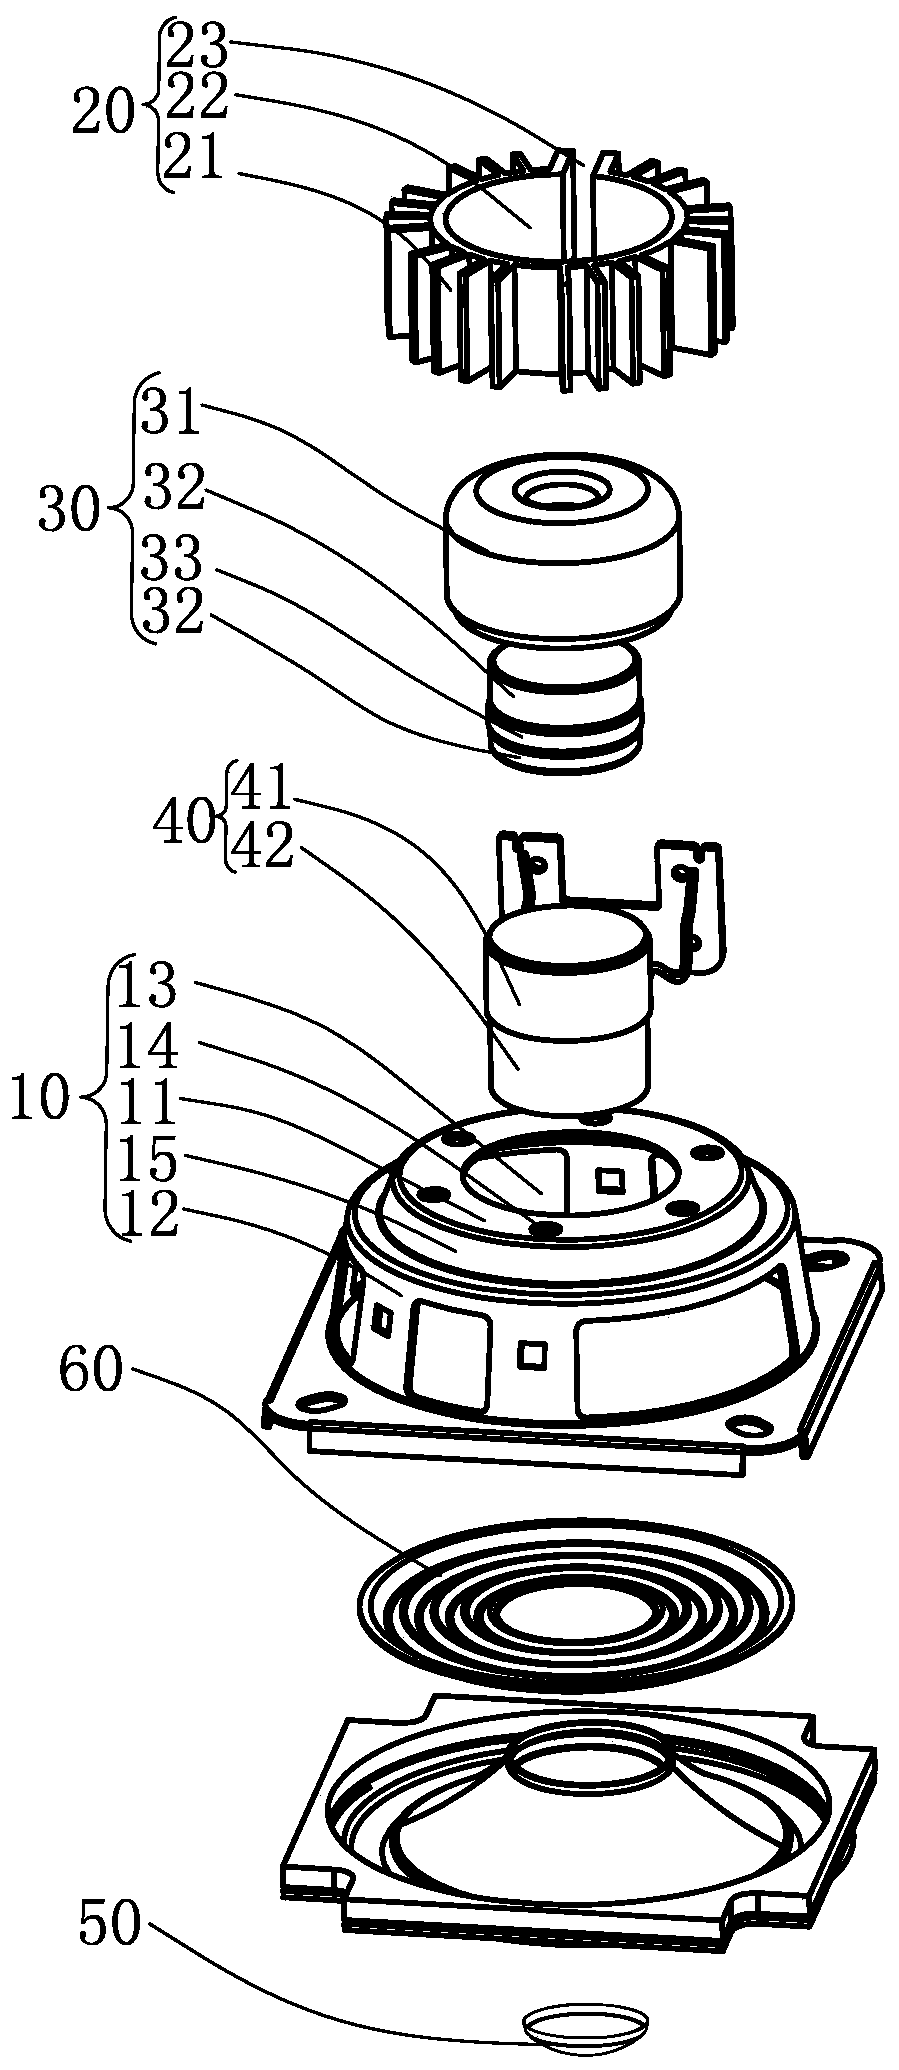 A heat dissipation system of a full-frequency loudspeaker